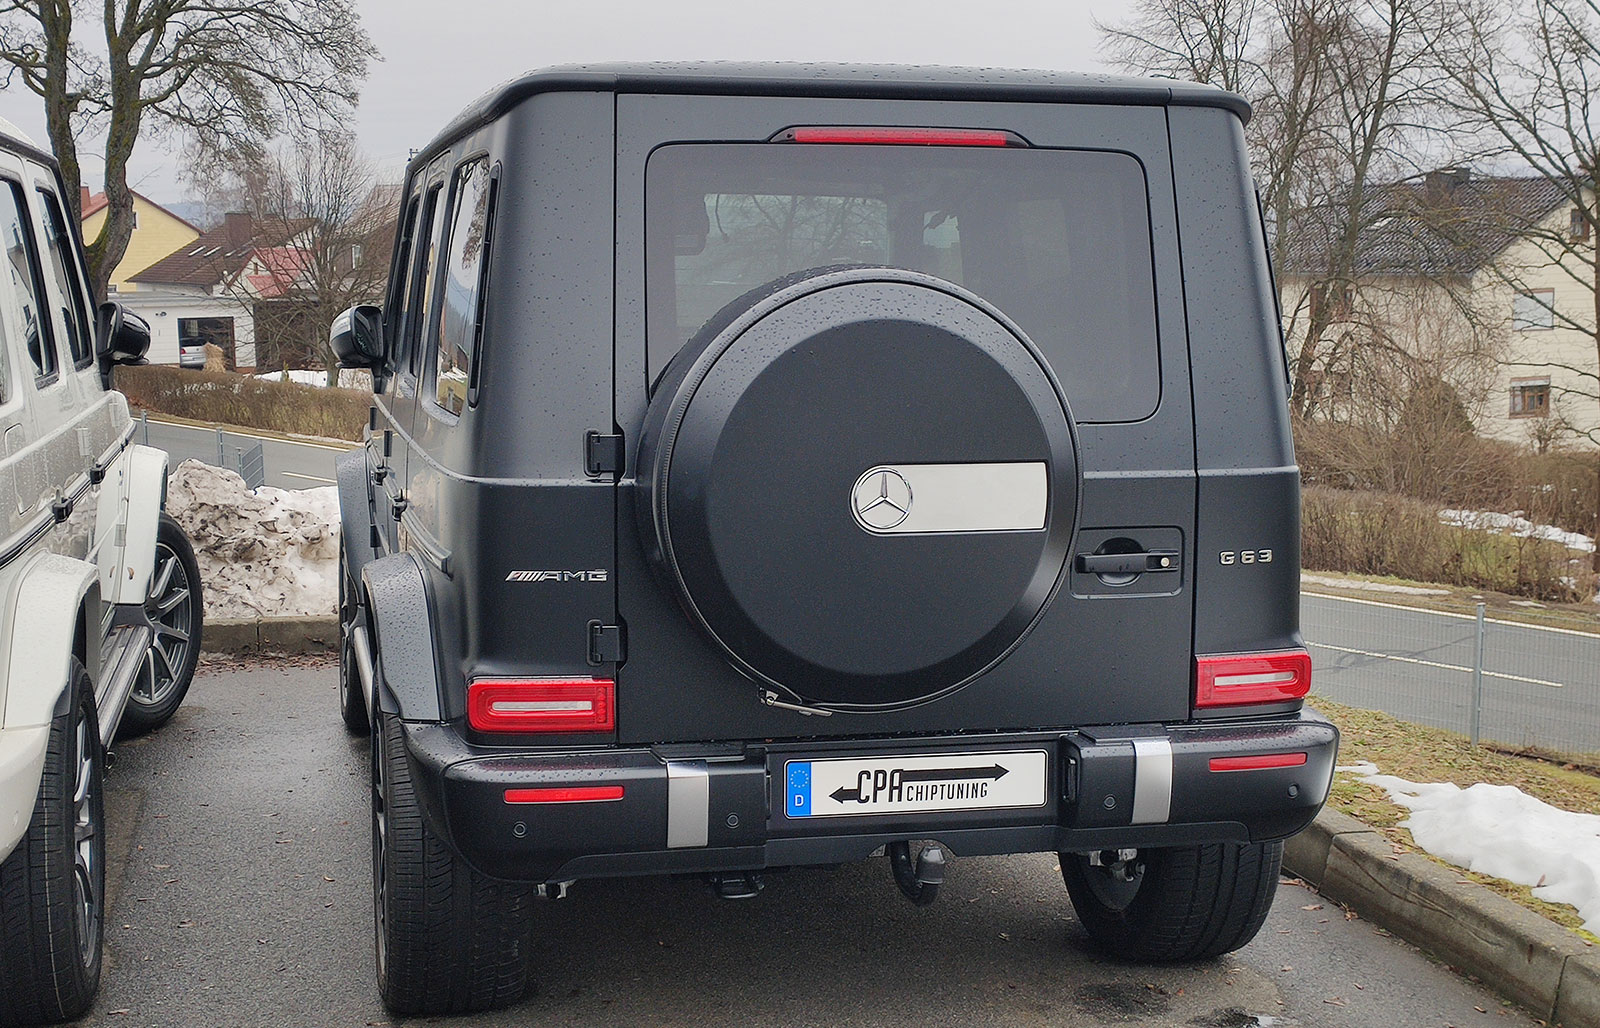 The new AMG G 63 is by no means a softie